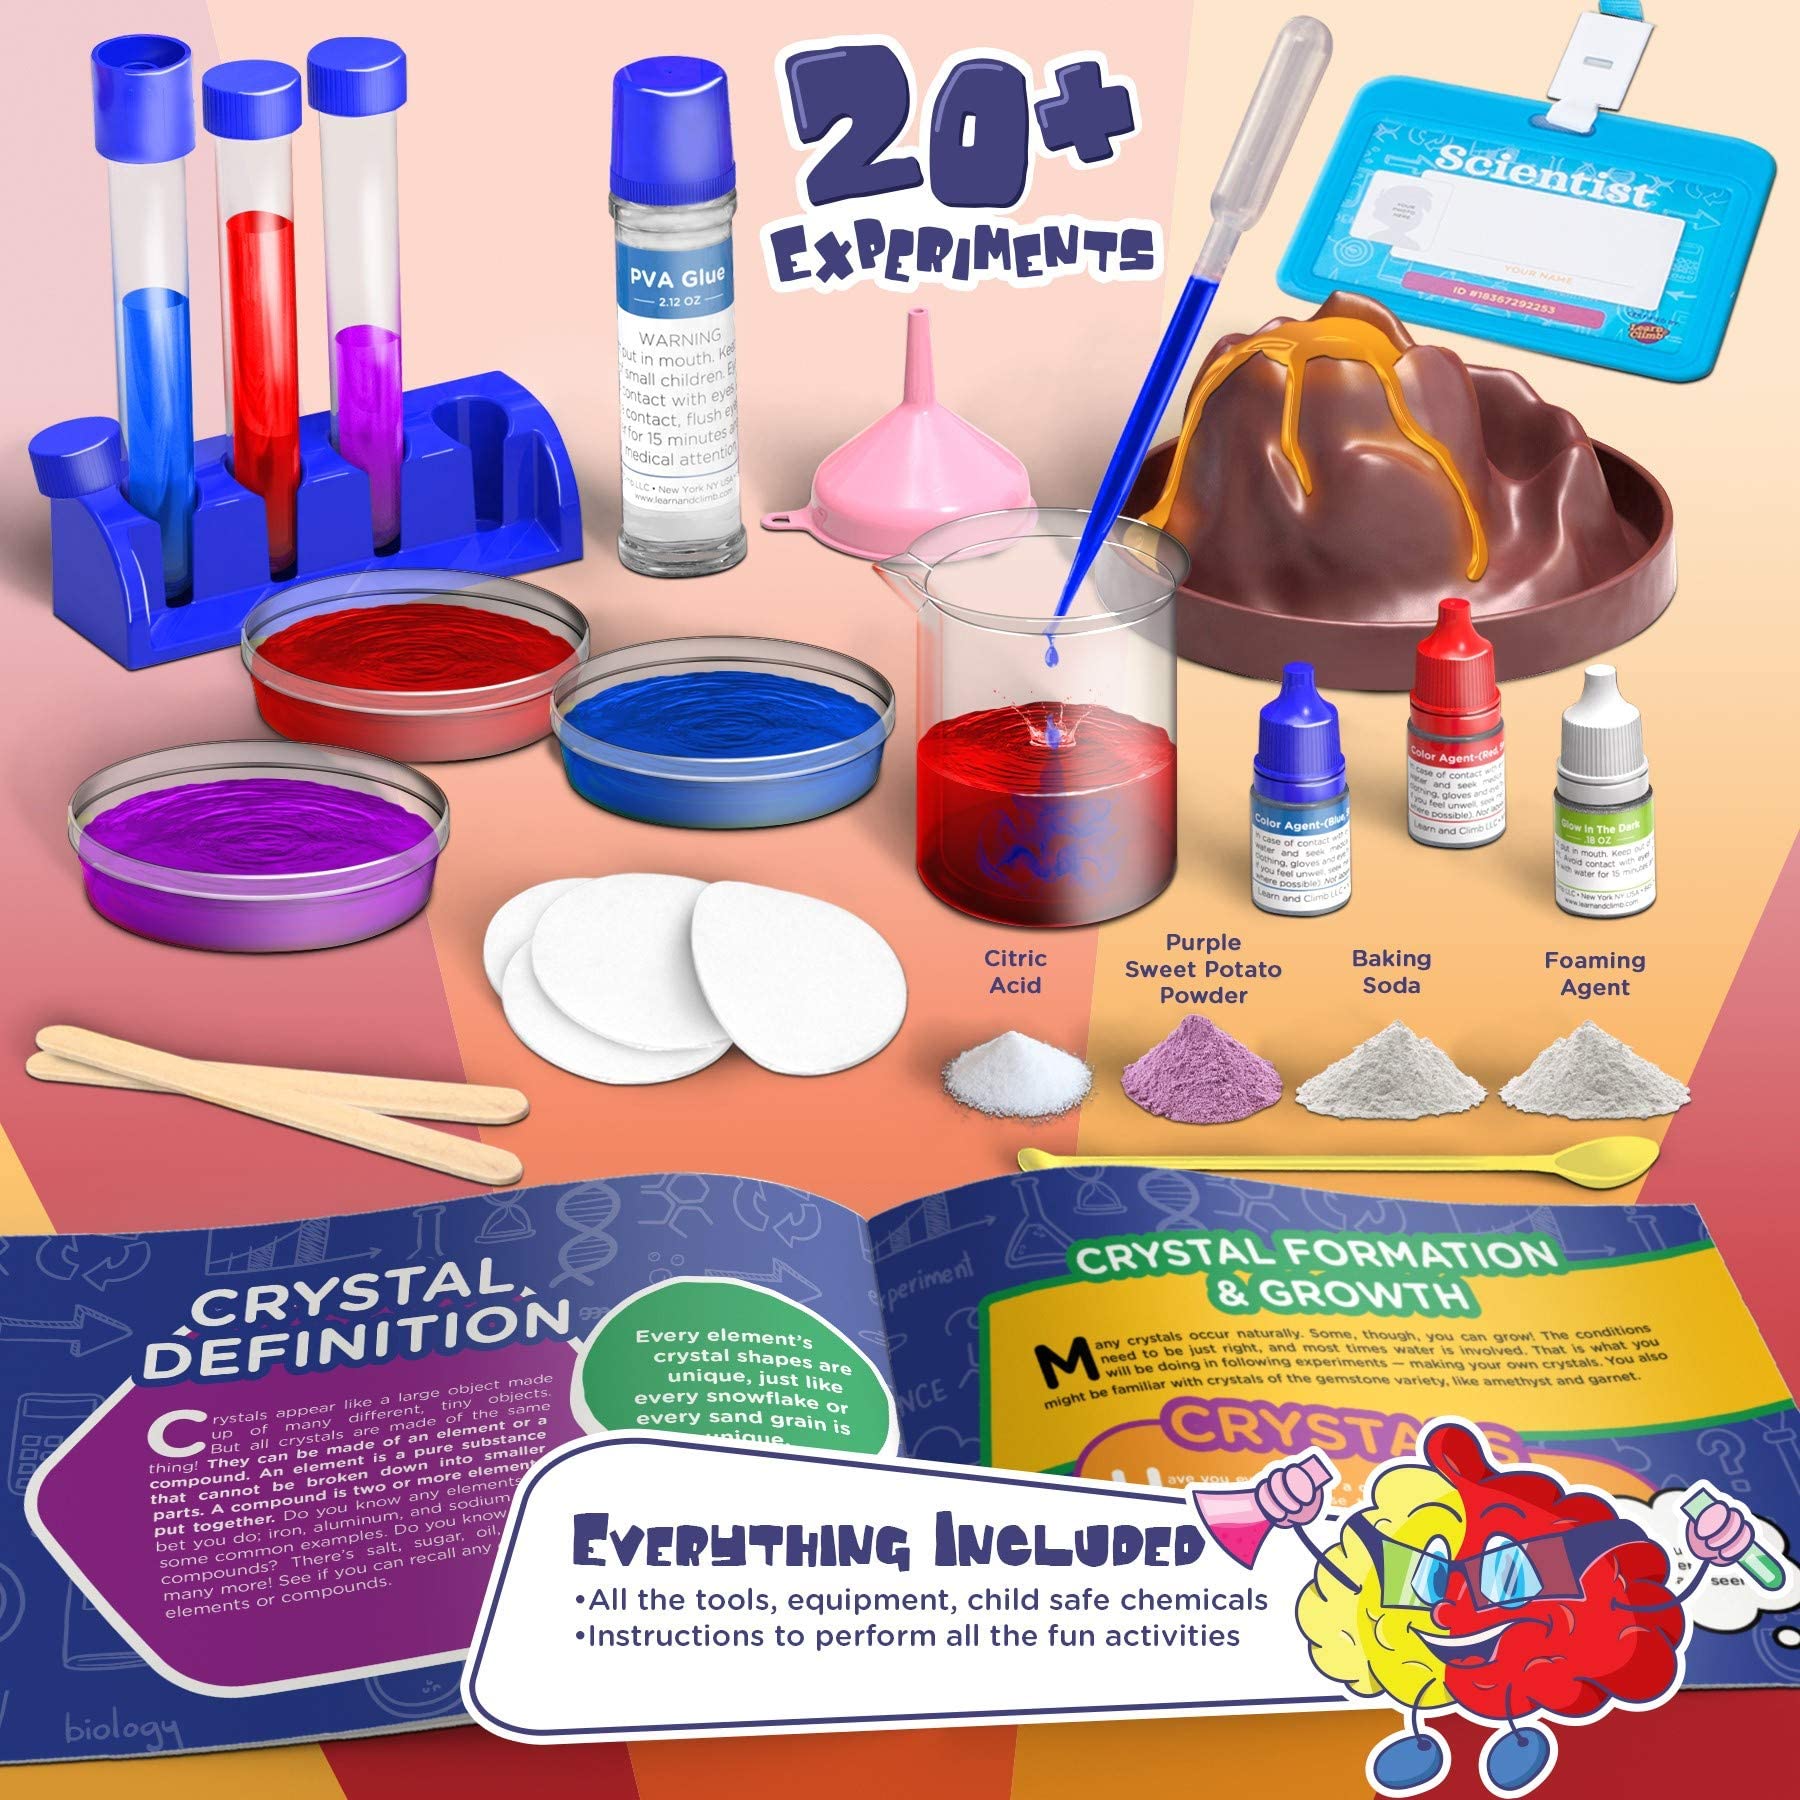 Learn & Climb 21 Science Experiments for Kids - Science Kit Gift Set 